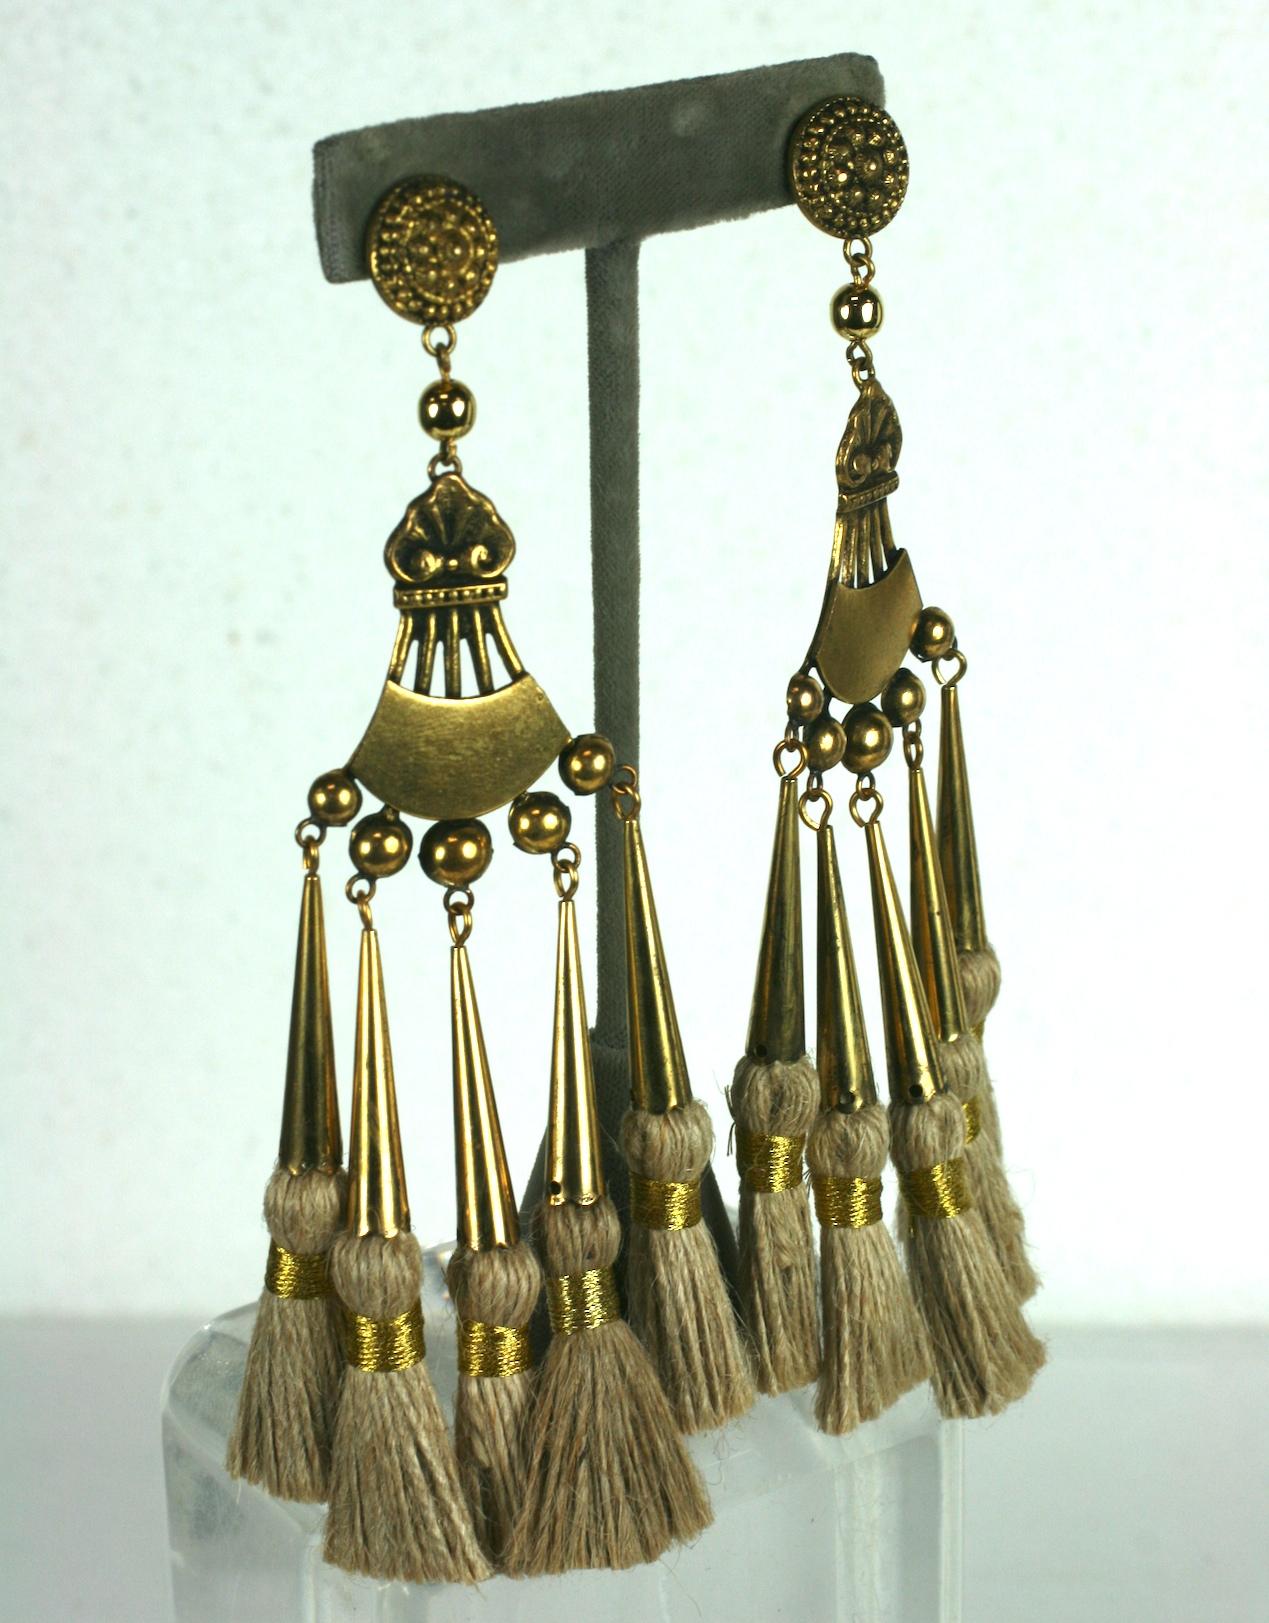 Important Maison Denez for Yves Saint Laurent Haute Couture African Collection Long Ear clips circa 1967. Of antique gilt bronze with jute tassel accents wrapped with gold bullion threads. Clip back fittings. 5.75